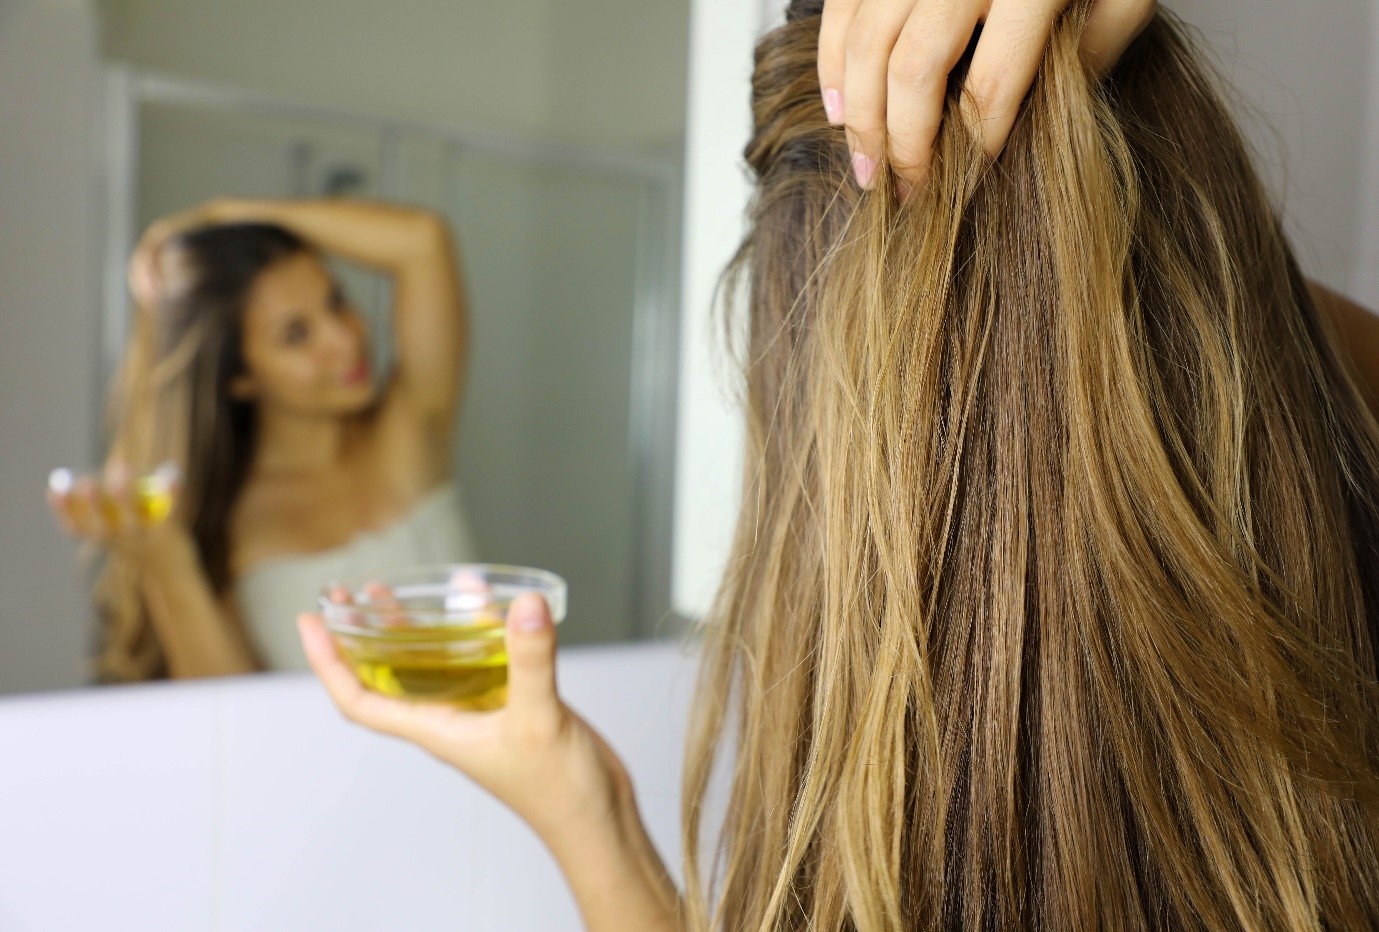 Hair Oiling: Should you be using Olive Oil in your hair?